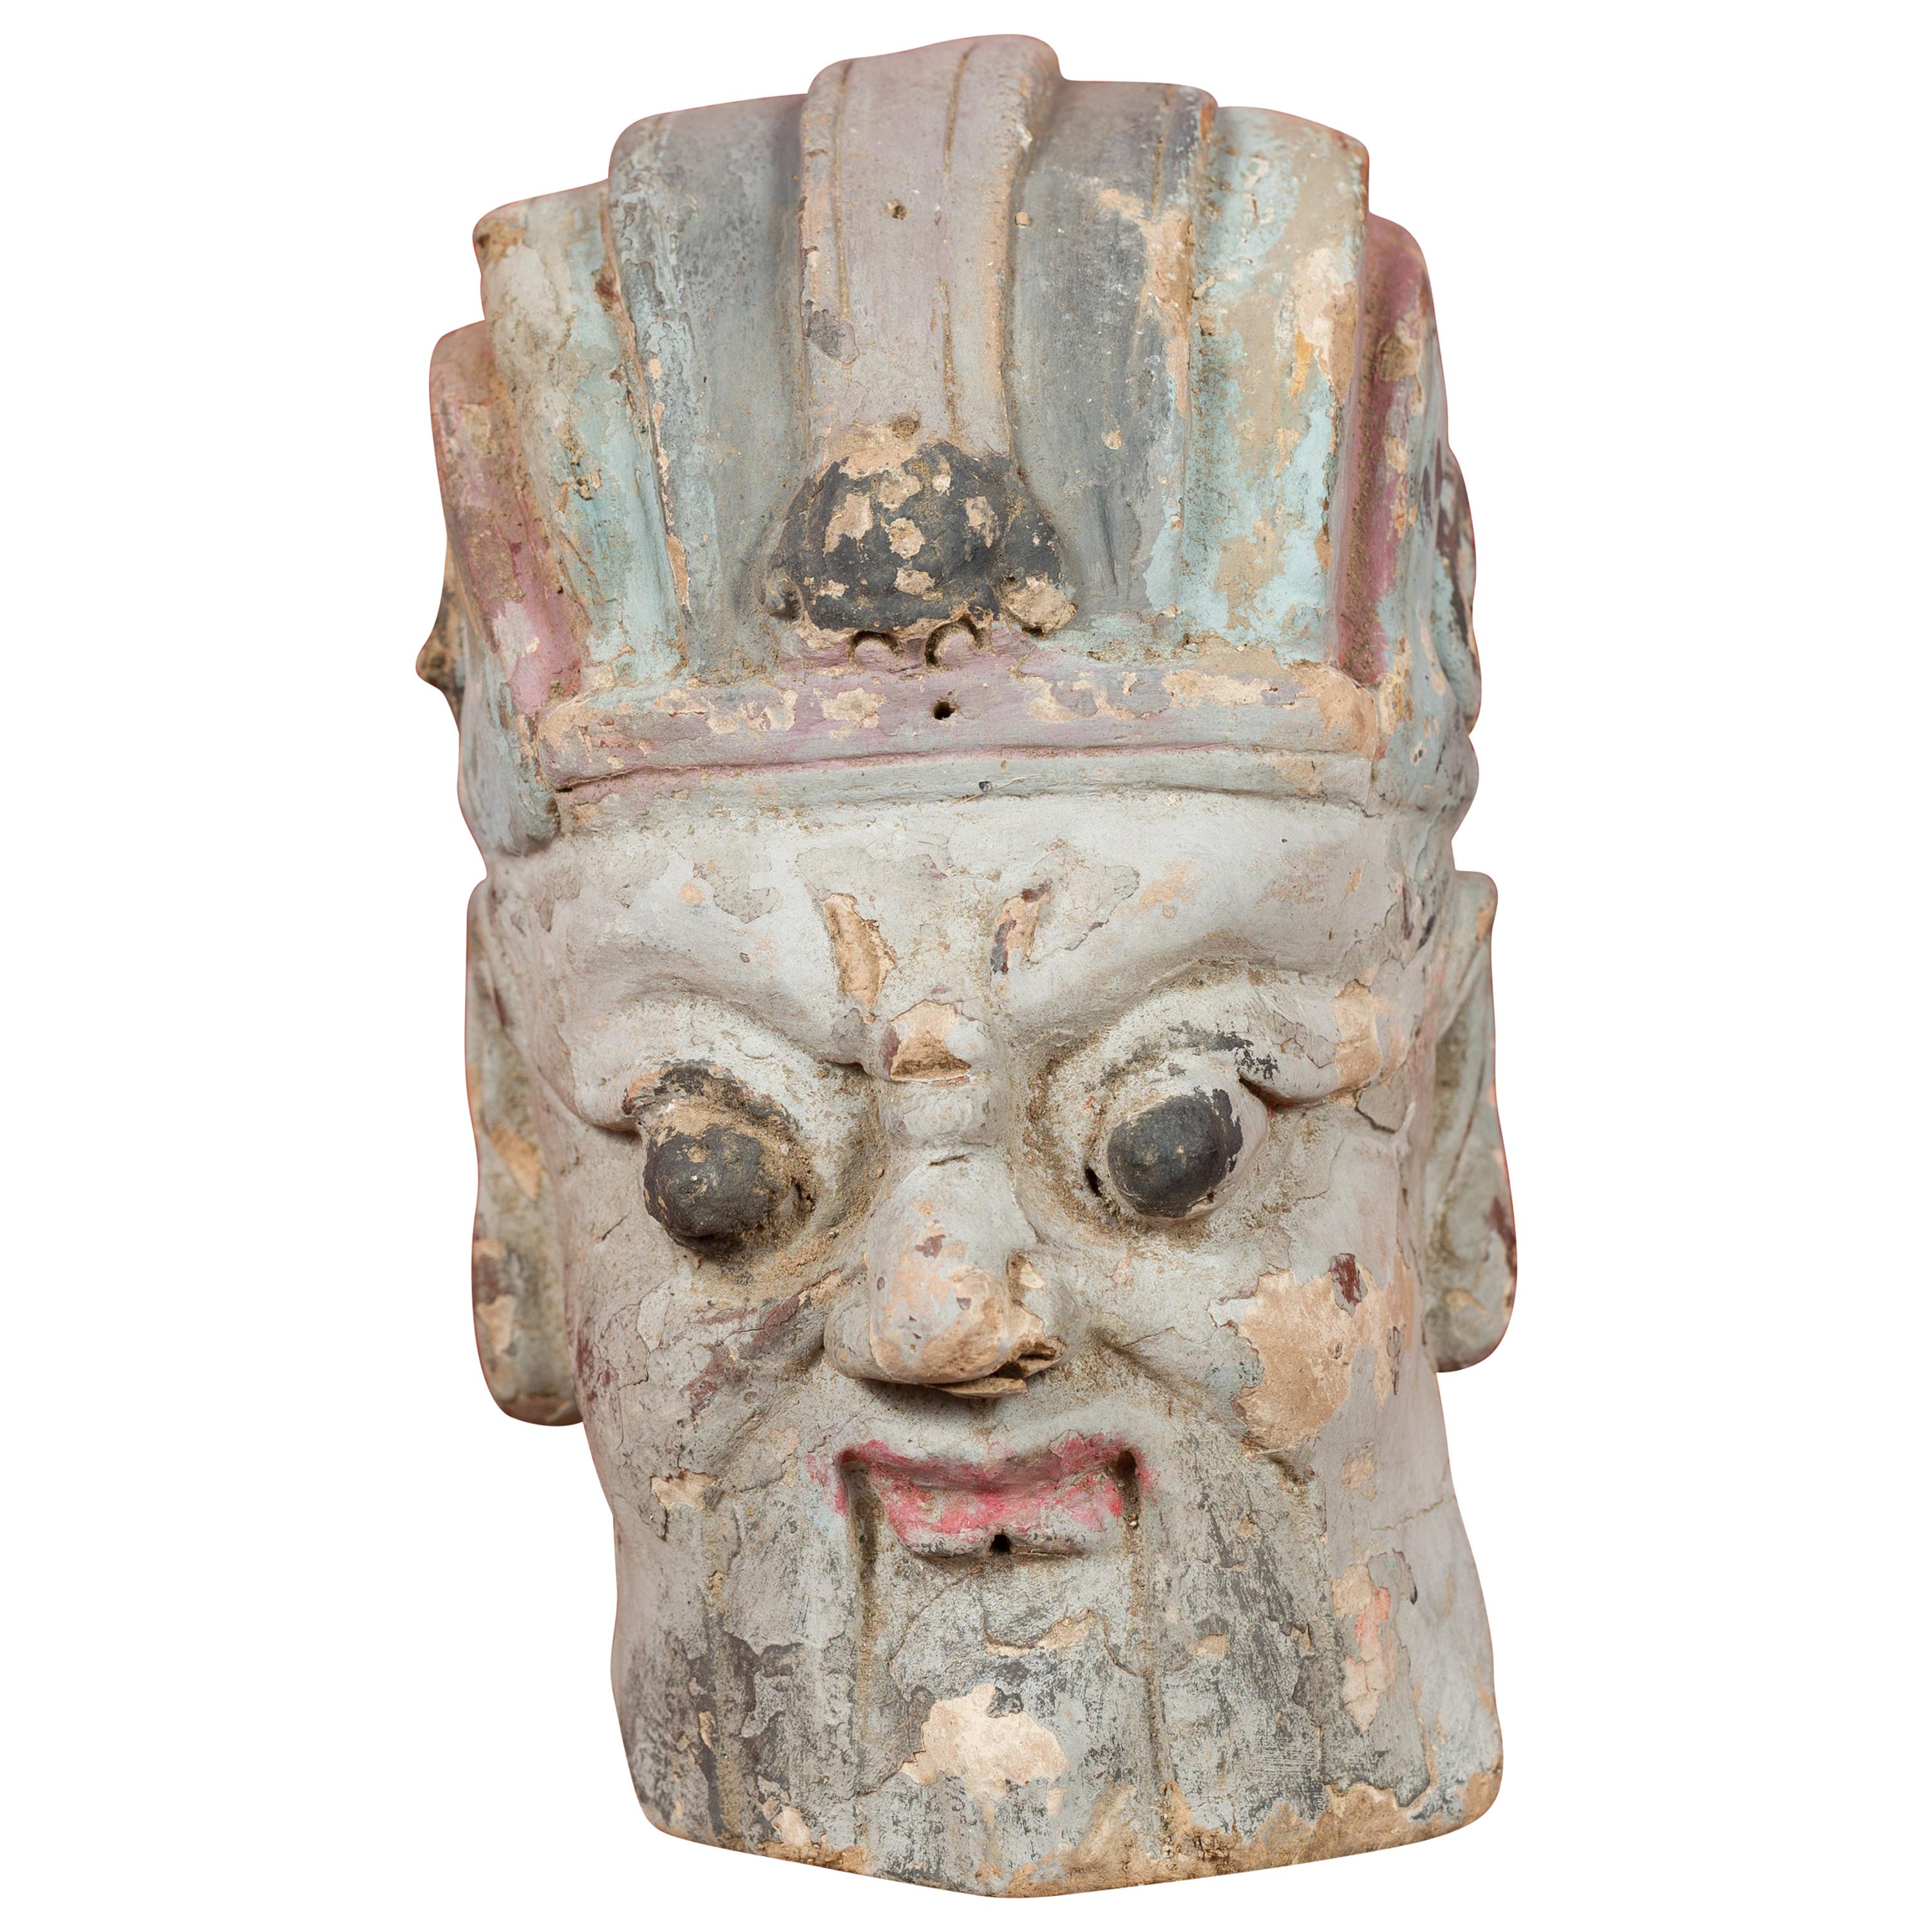 Antique Chinese Qing Dynasty Hand Painted Terracotta Head with Headdress